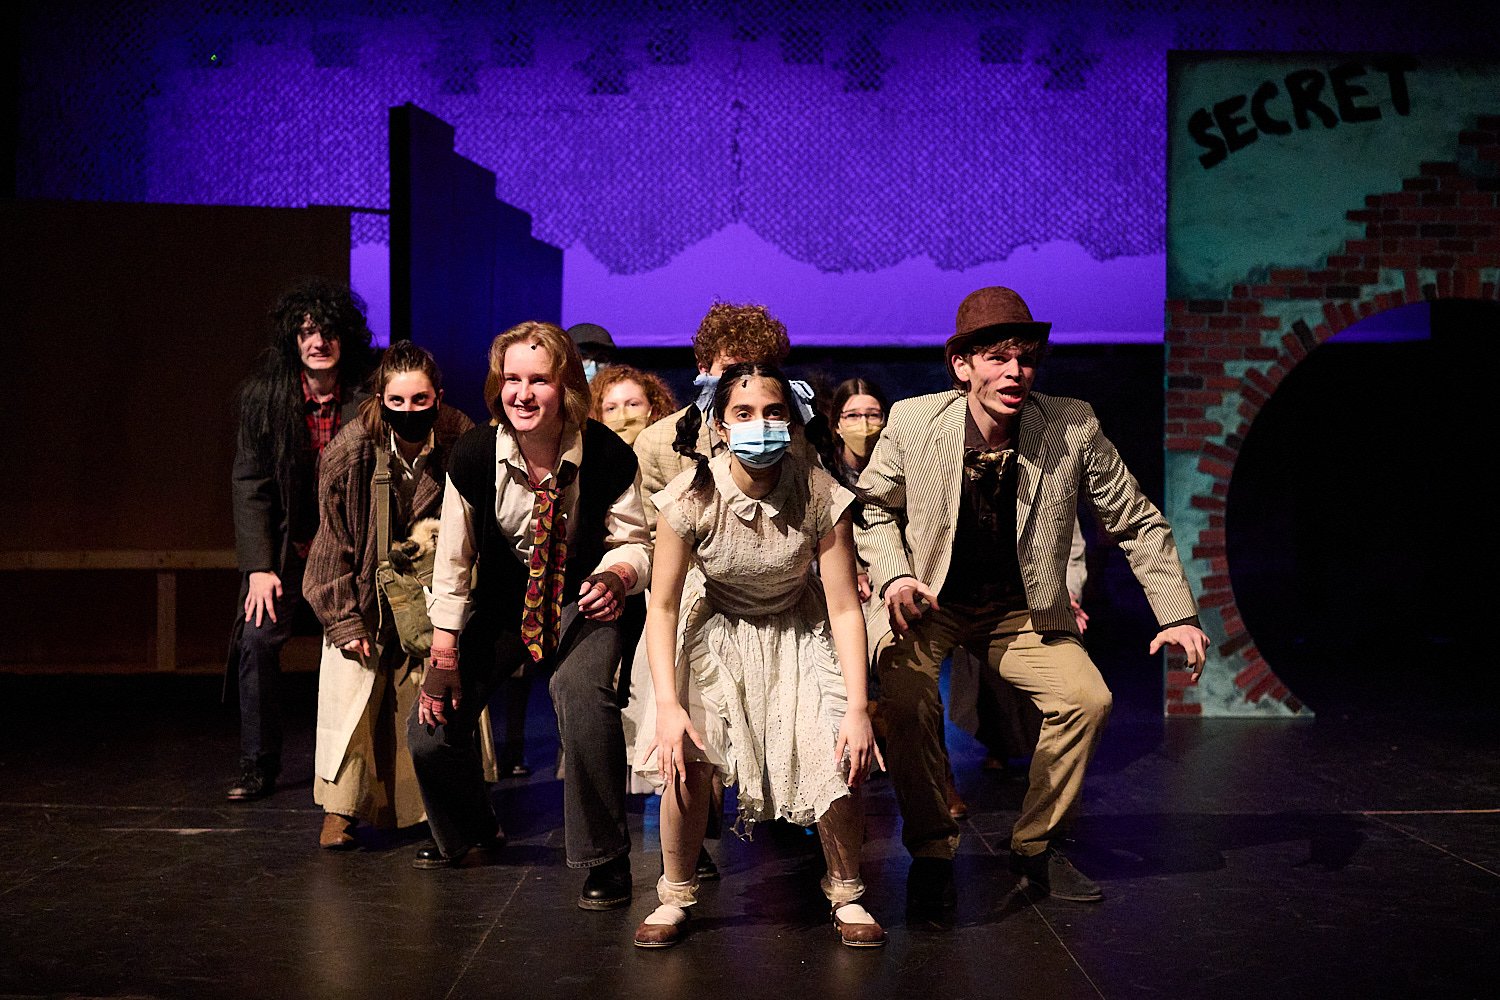  SEWICKLEY, PA, USA - MARCH 2ND 2022: High School students of Sewickley Academy are performing in an annual musical show “Urinetown” running on March 3rd-5th 2022. Alena Gurevich 